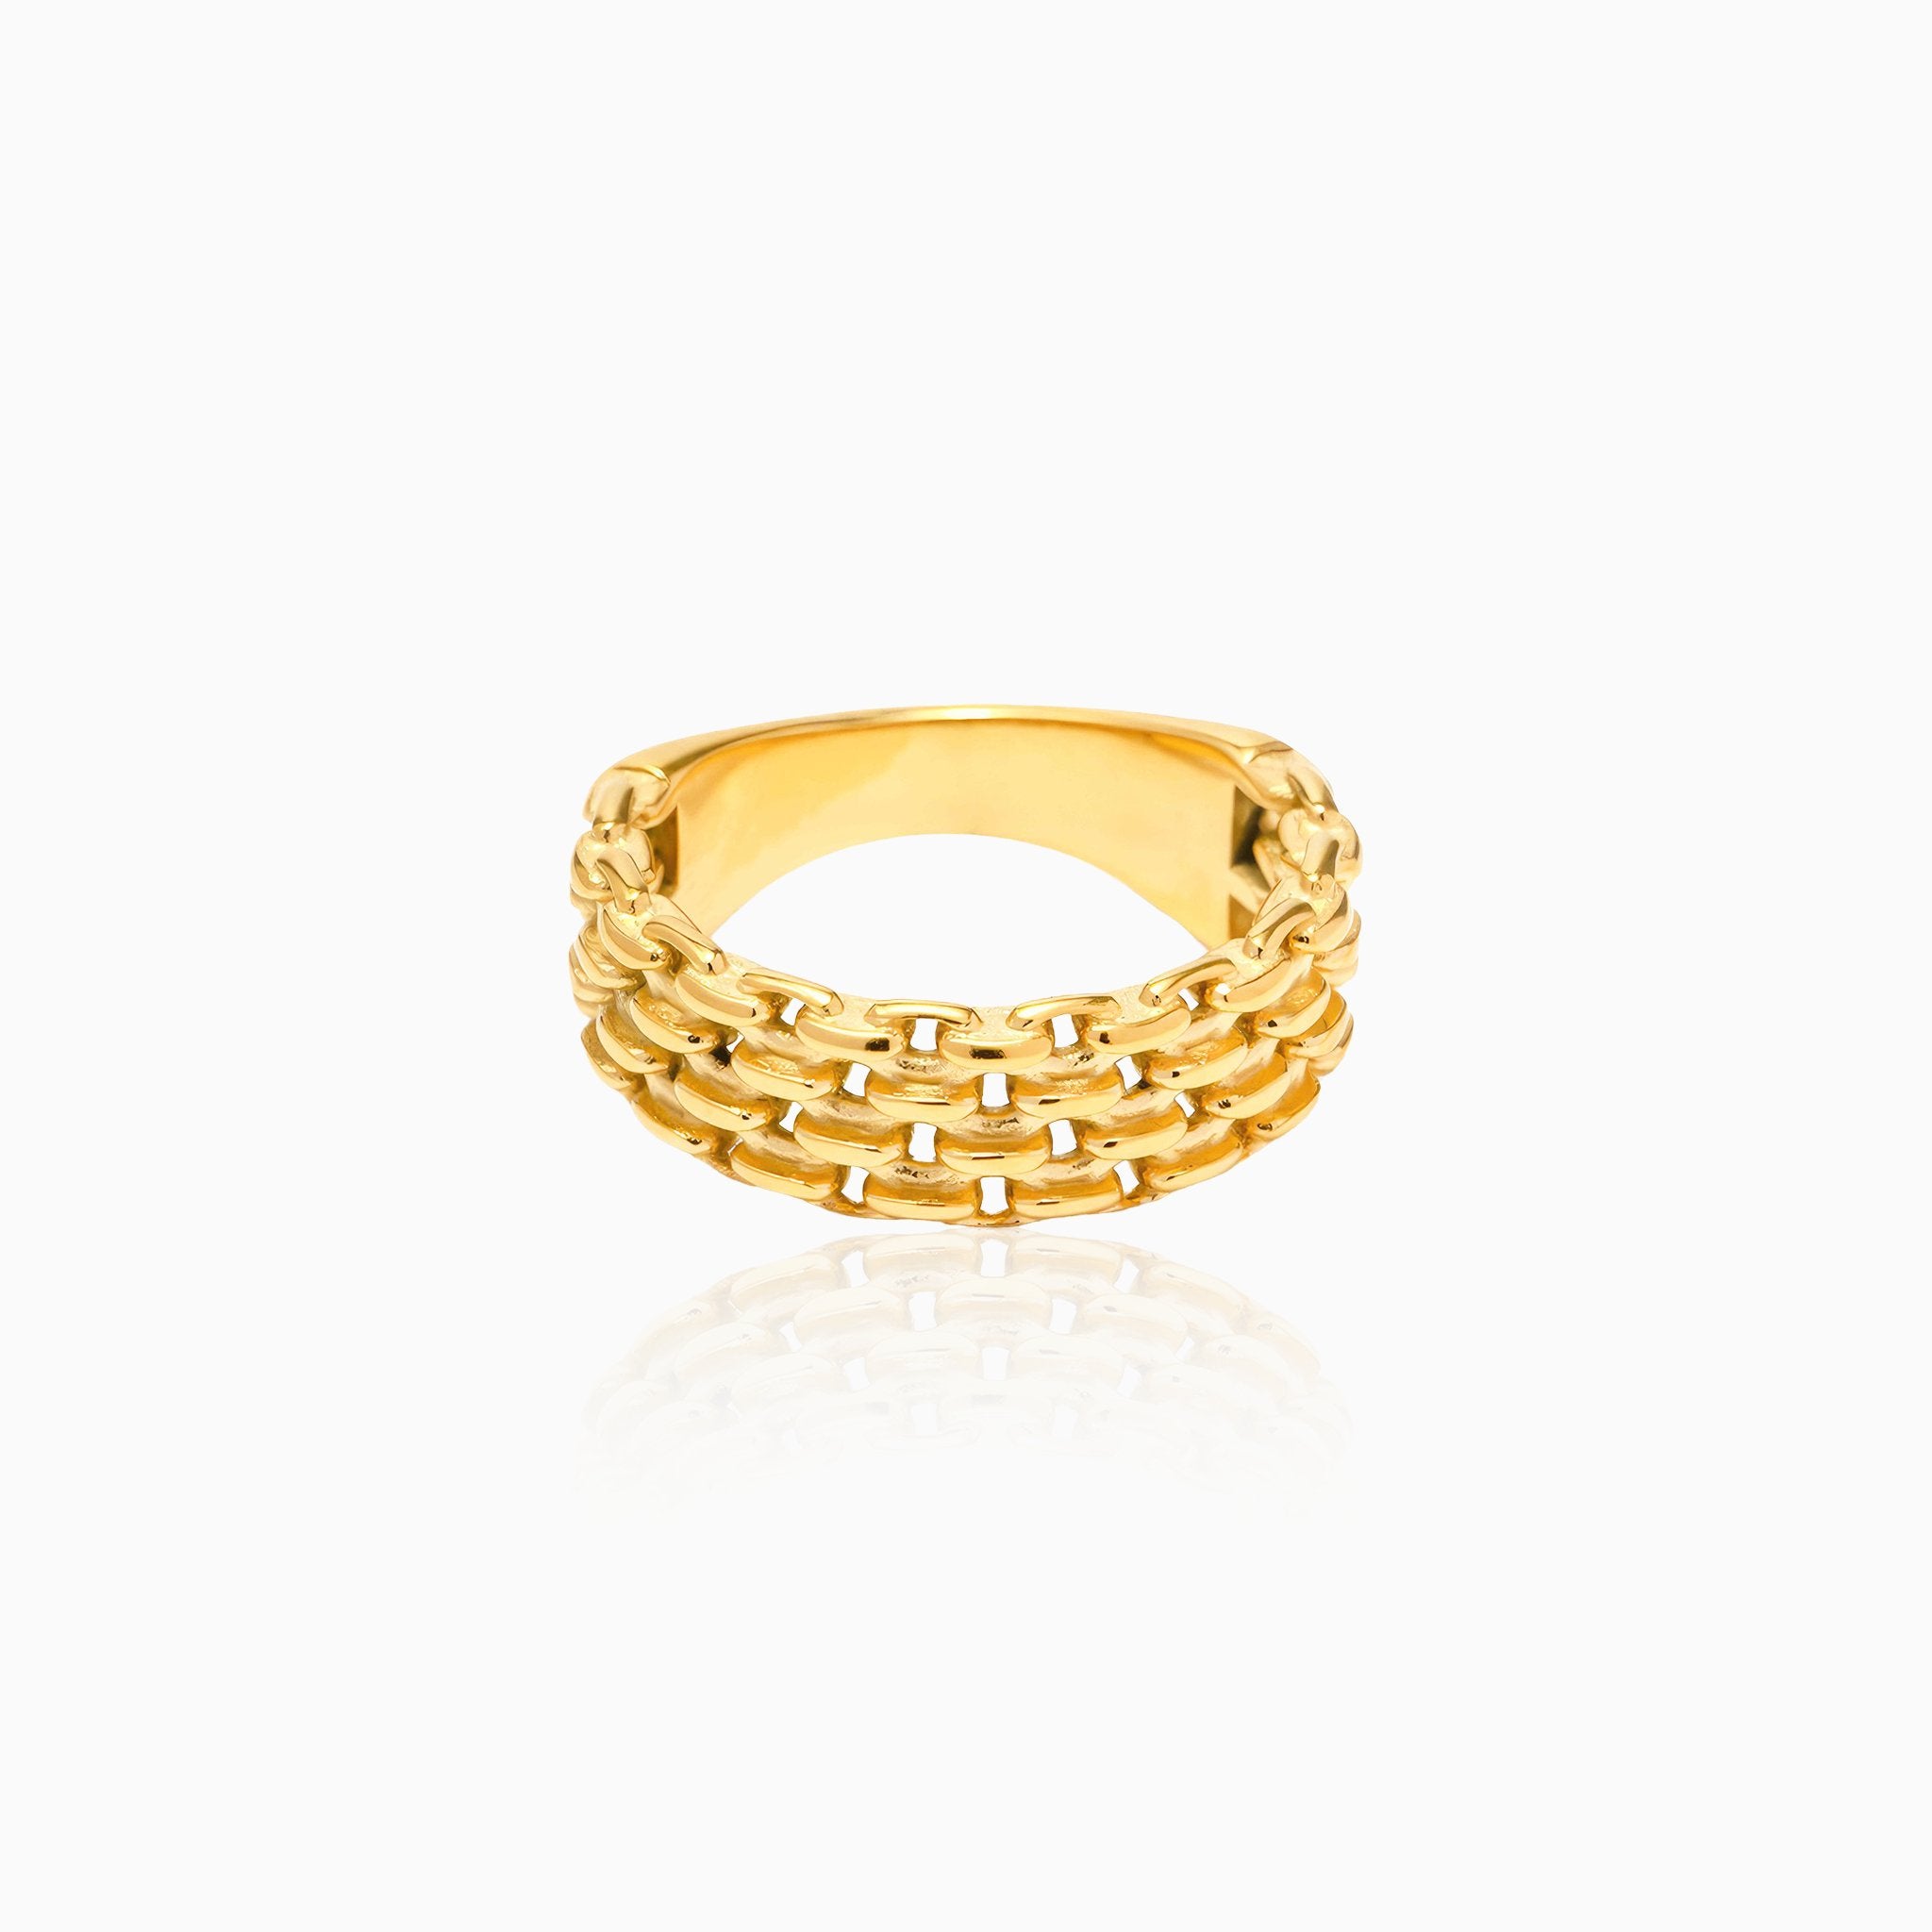 Hollow Braided Versatile Ring - Nobbier - Ring - 18K Gold And Titanium PVD Coated Jewelry